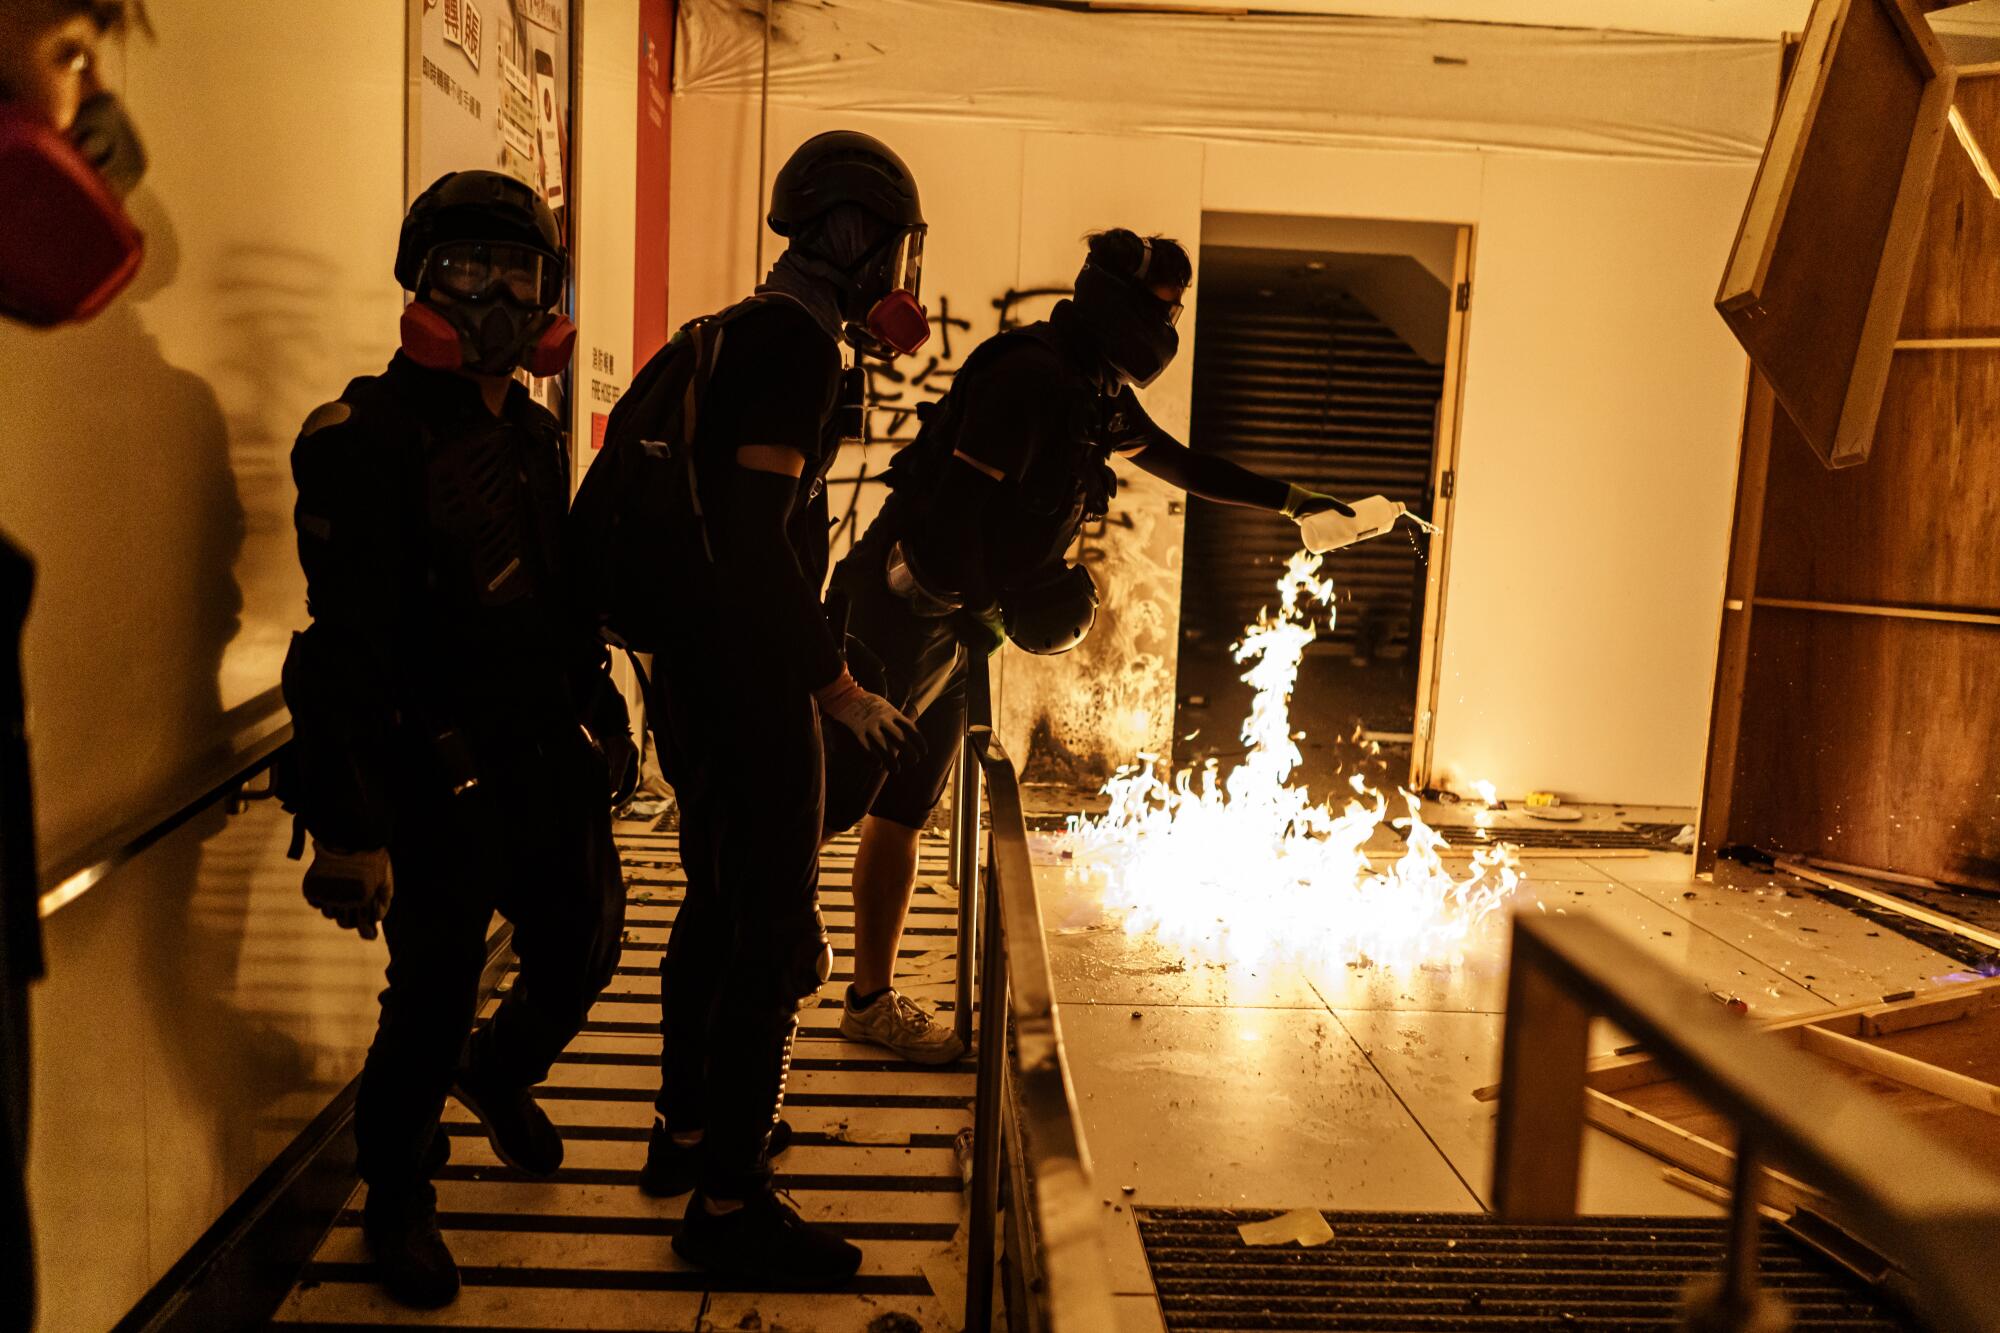 Protesters set fire to the interior of Bank of Chine, in the Mong Kok district of Hong Kong.